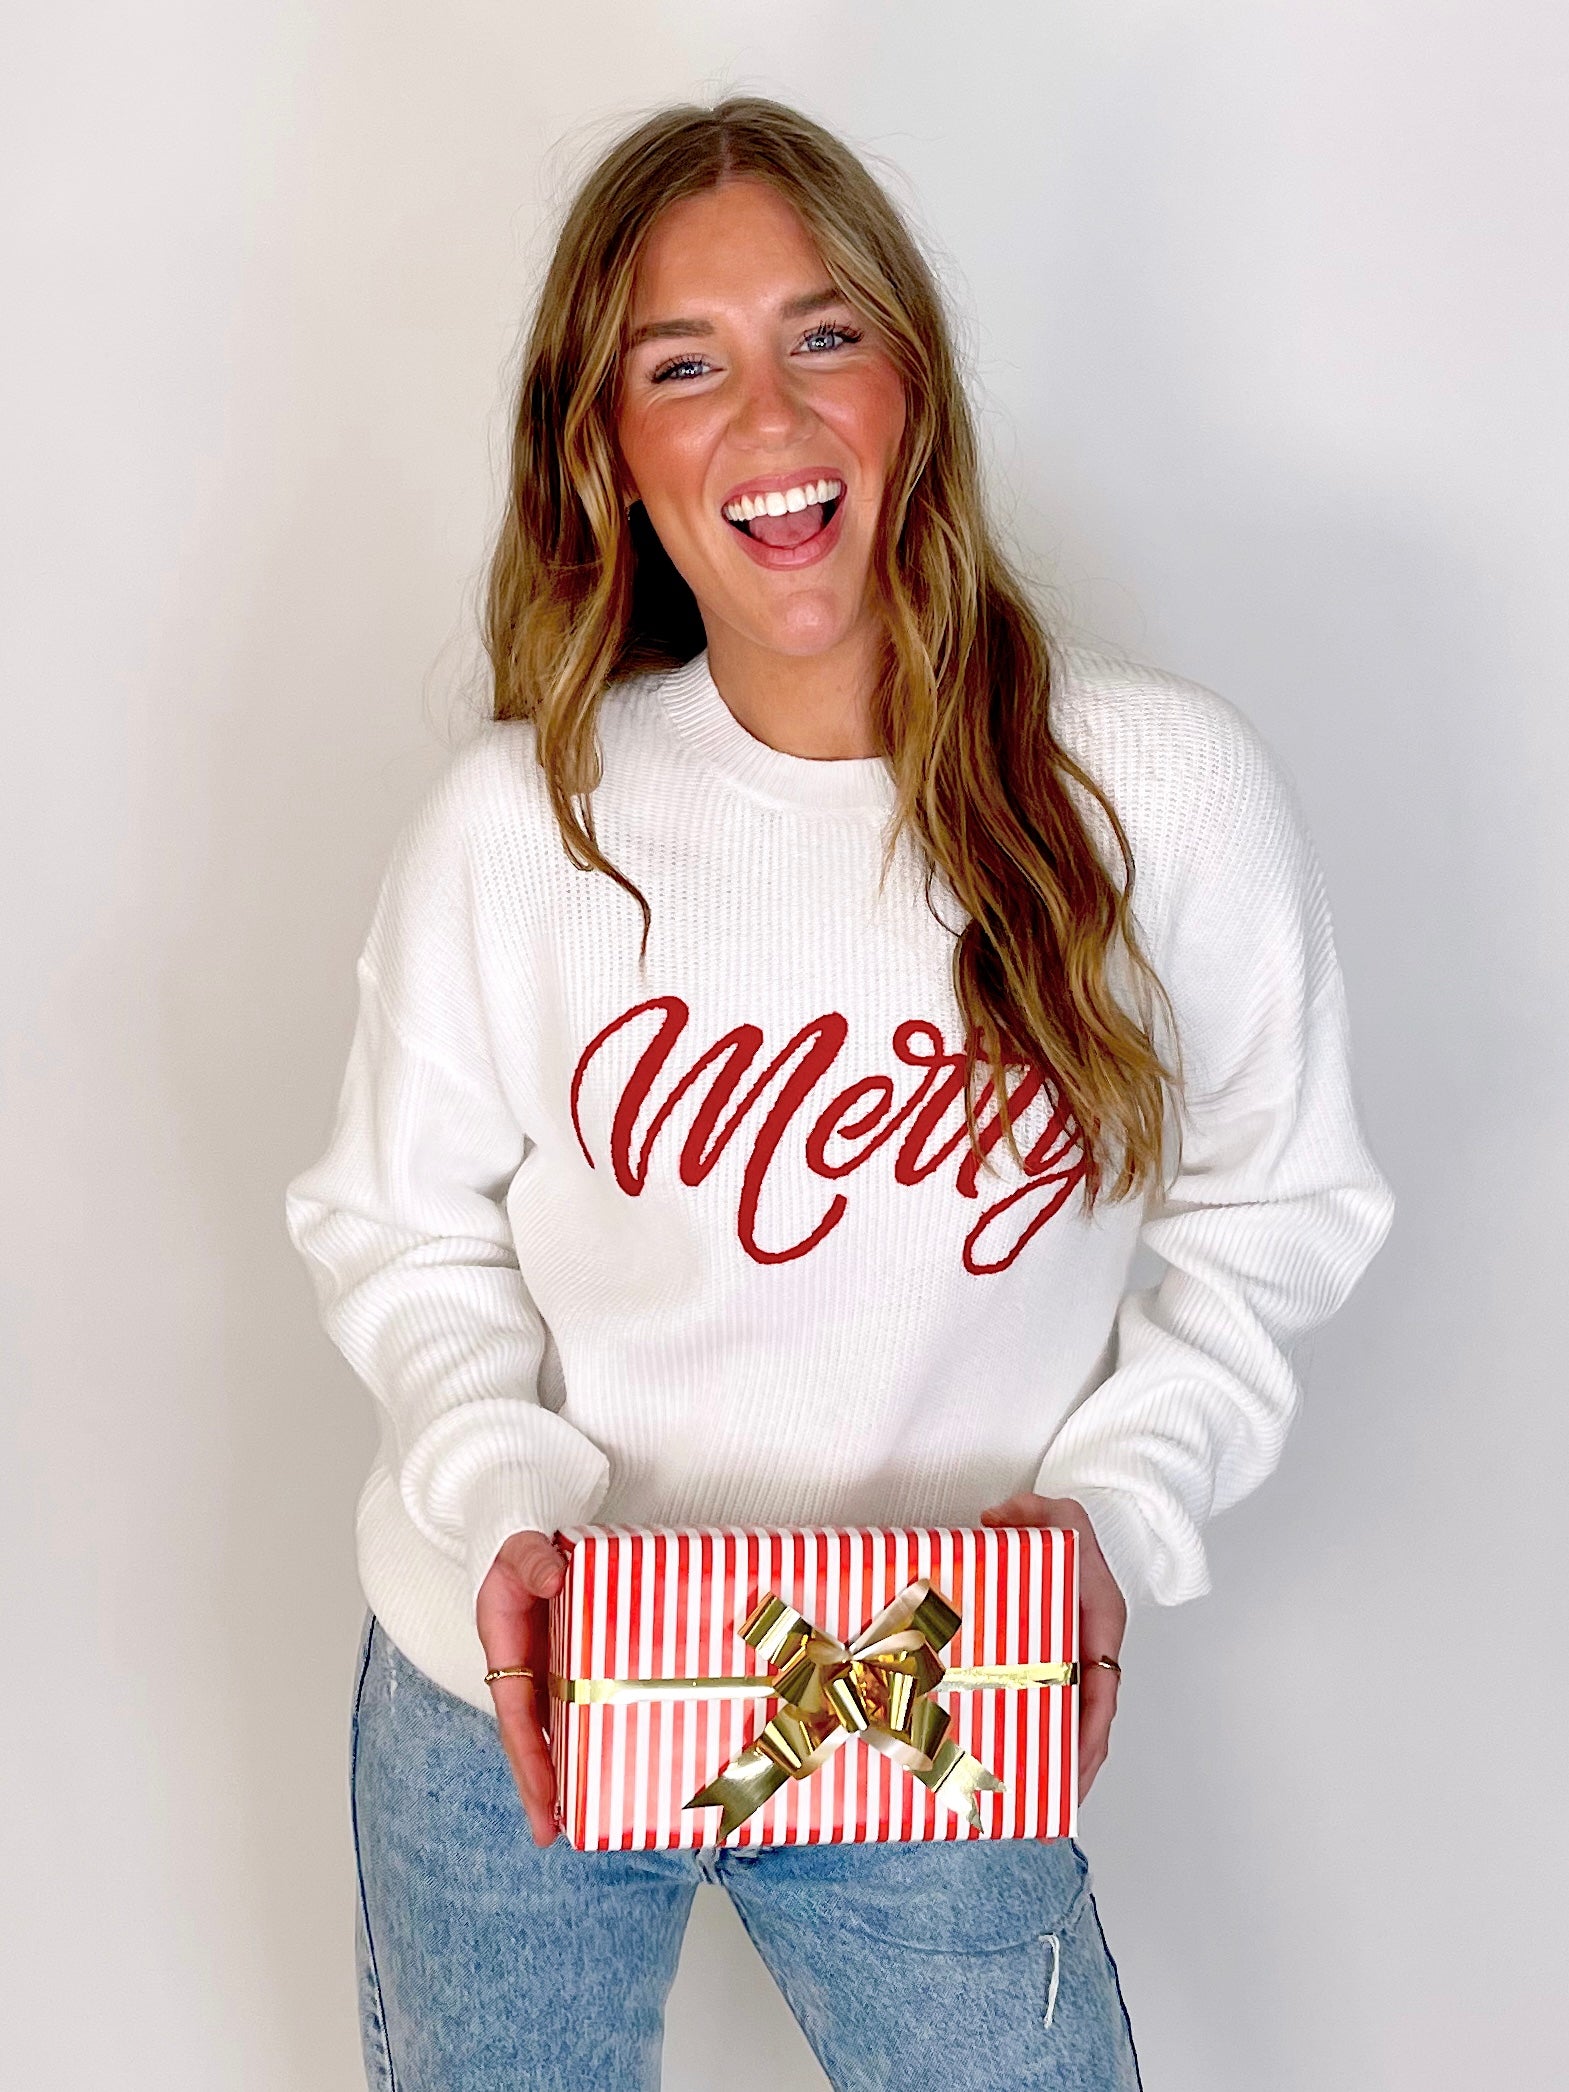 Be Merry Sweater-Sweatshirt-Why Dress-The Village Shoppe, Women’s Fashion Boutique, Shop Online and In Store - Located in Muscle Shoals, AL.